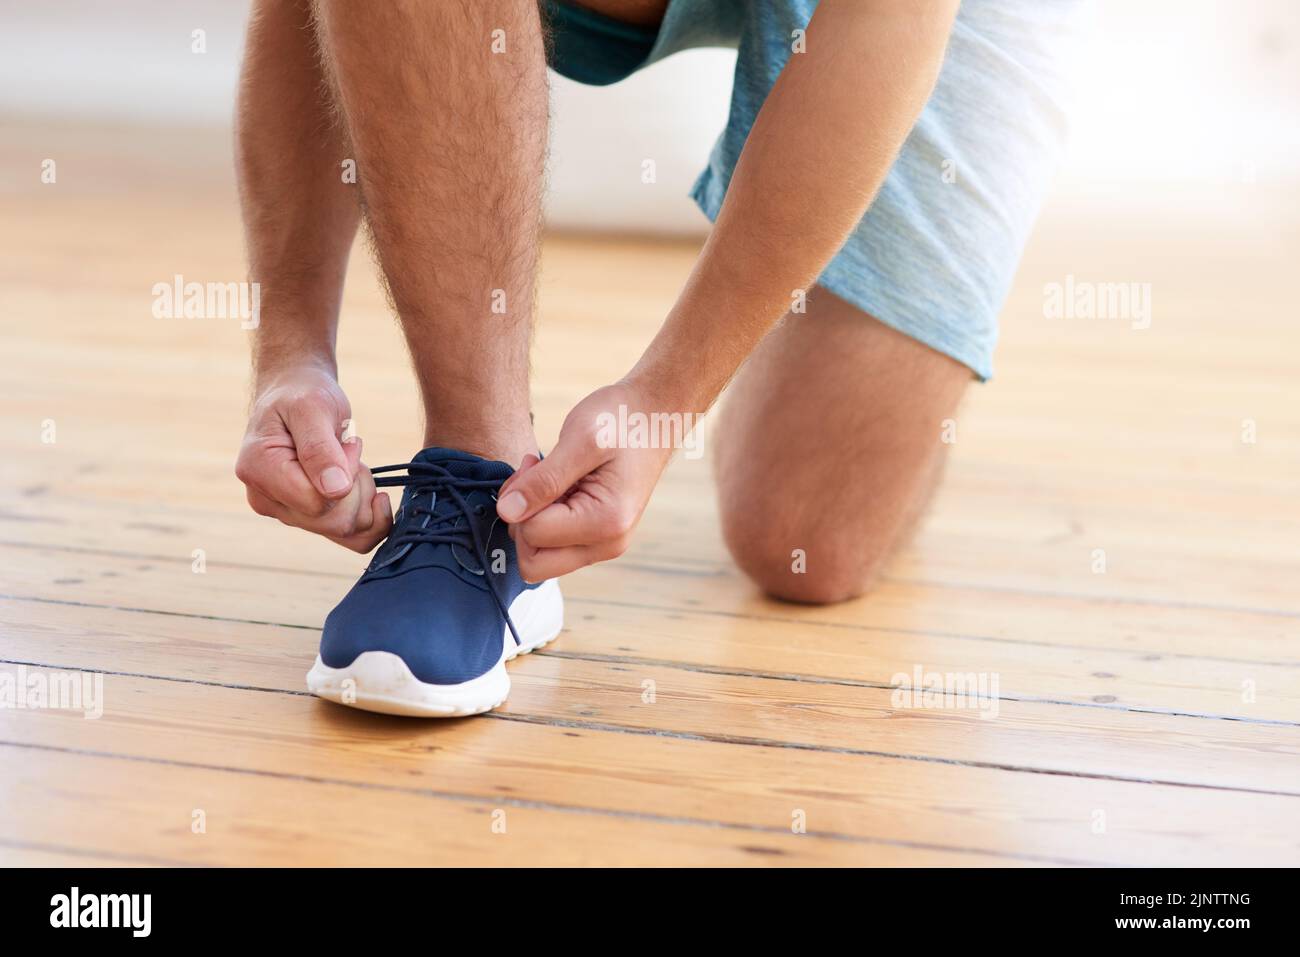 Lace up and lets get running. a man tying his shoelaces in a gym. Stock Photo